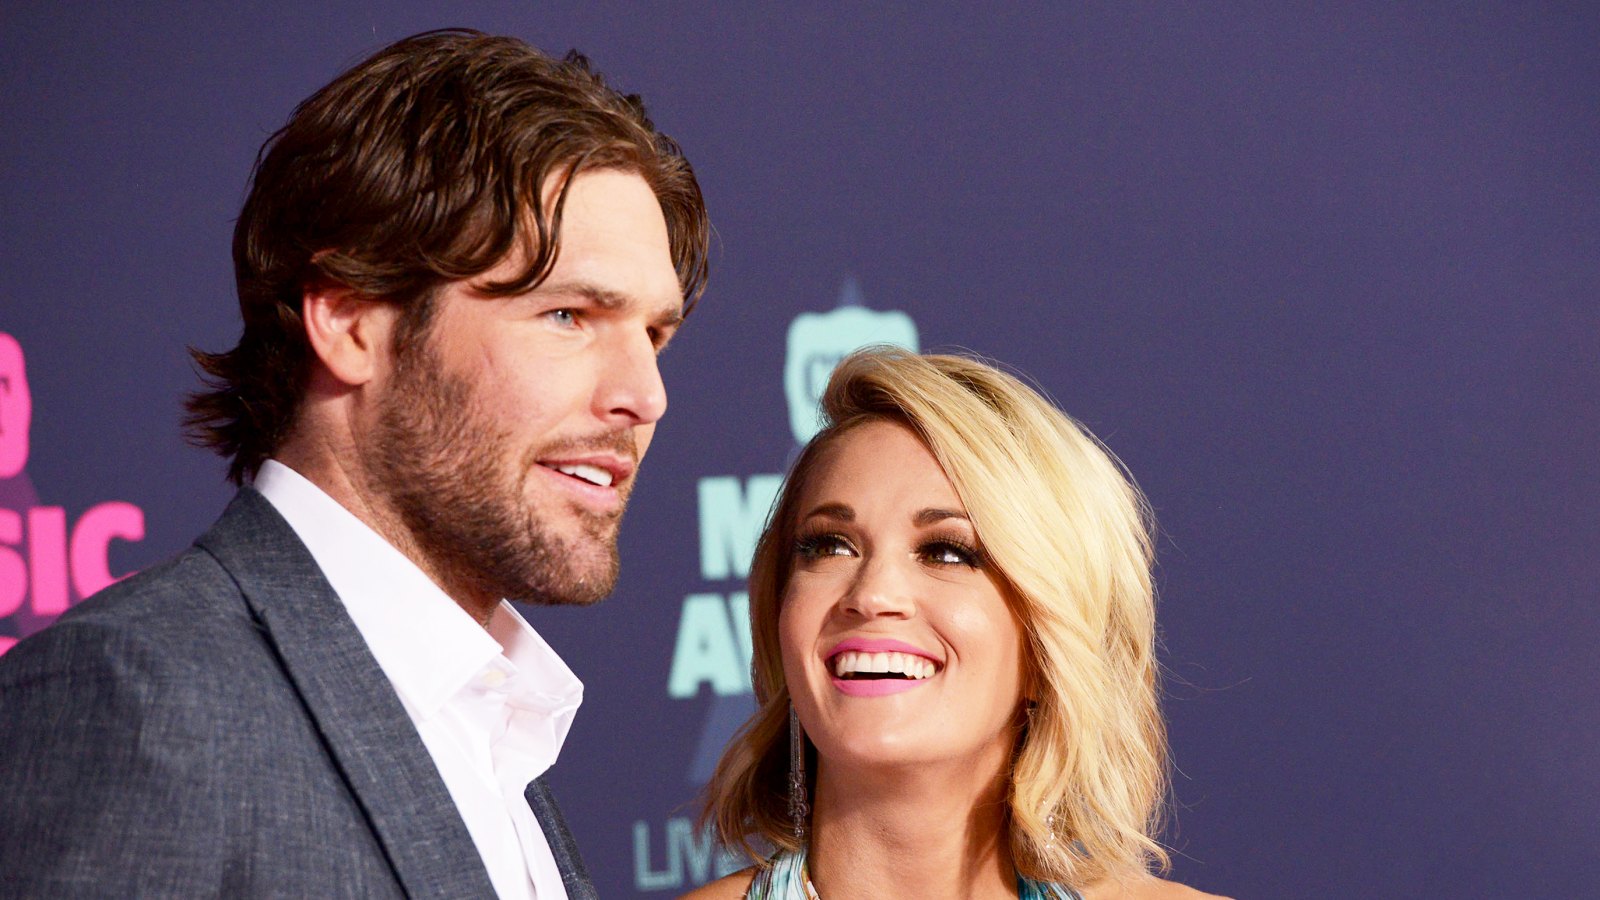 Carrie Underwood and Mike Fisher attend the 2016 CMT Music awards at the Bridgestone Arena in Nashville, Tennessee.